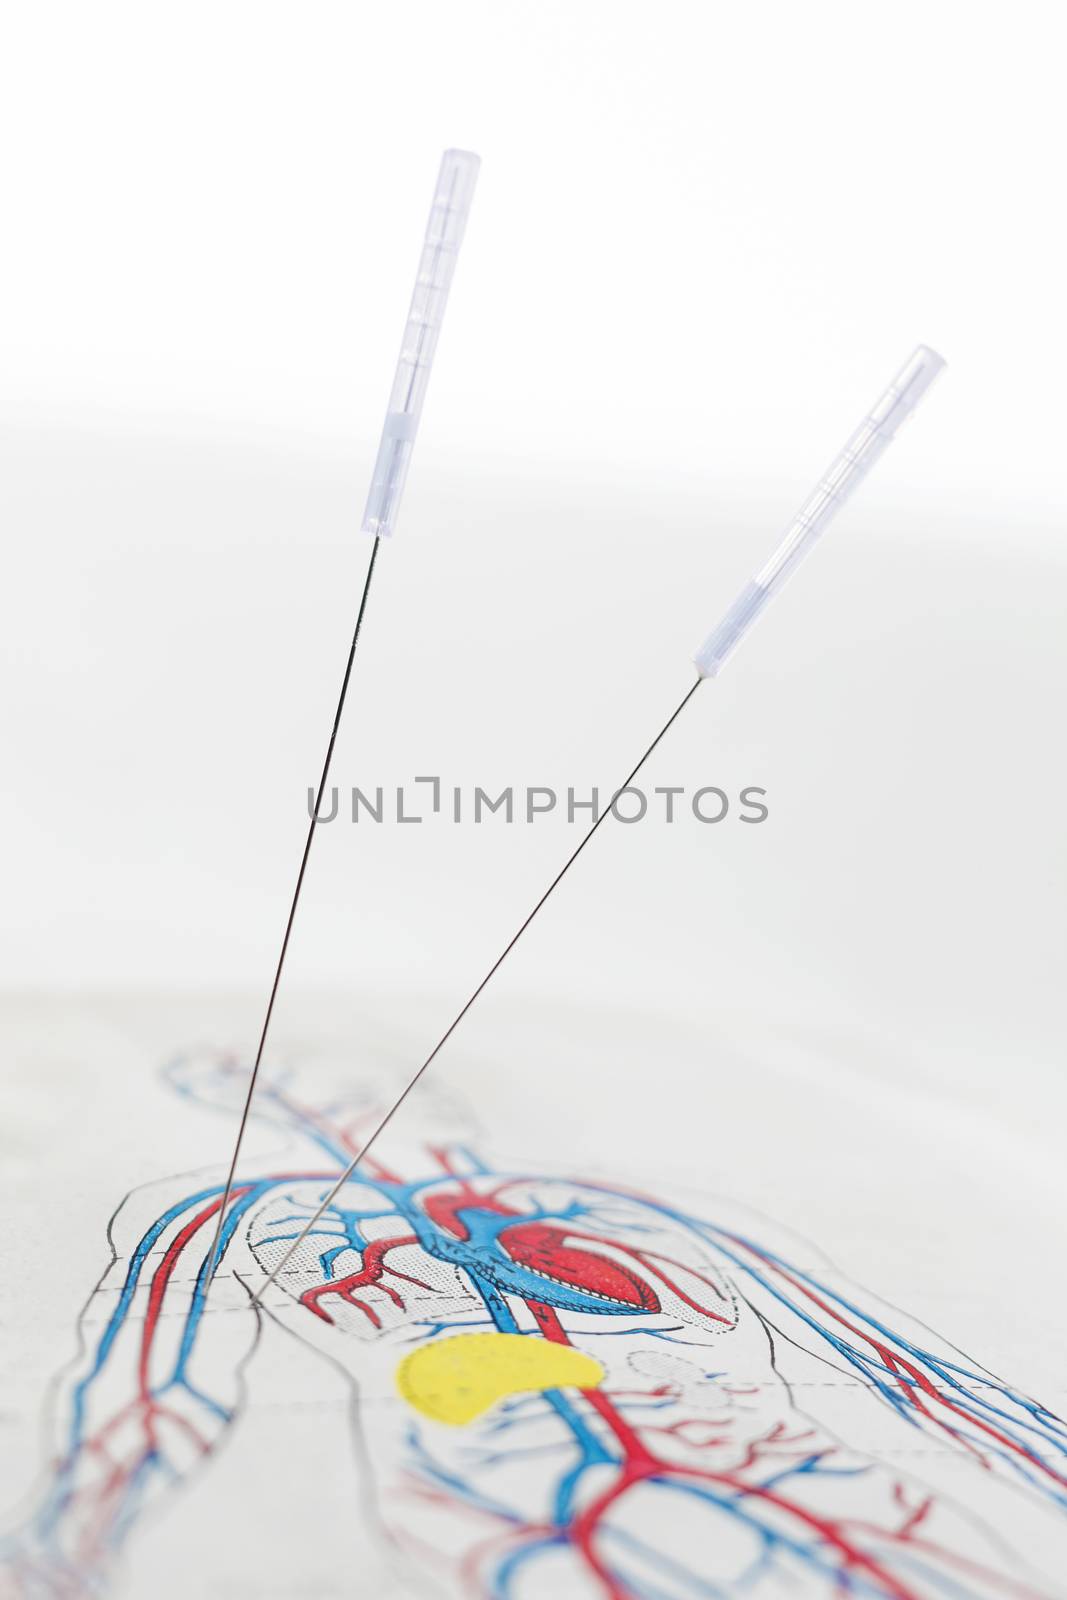 acupuncture needles on medicine book by JPC-PROD